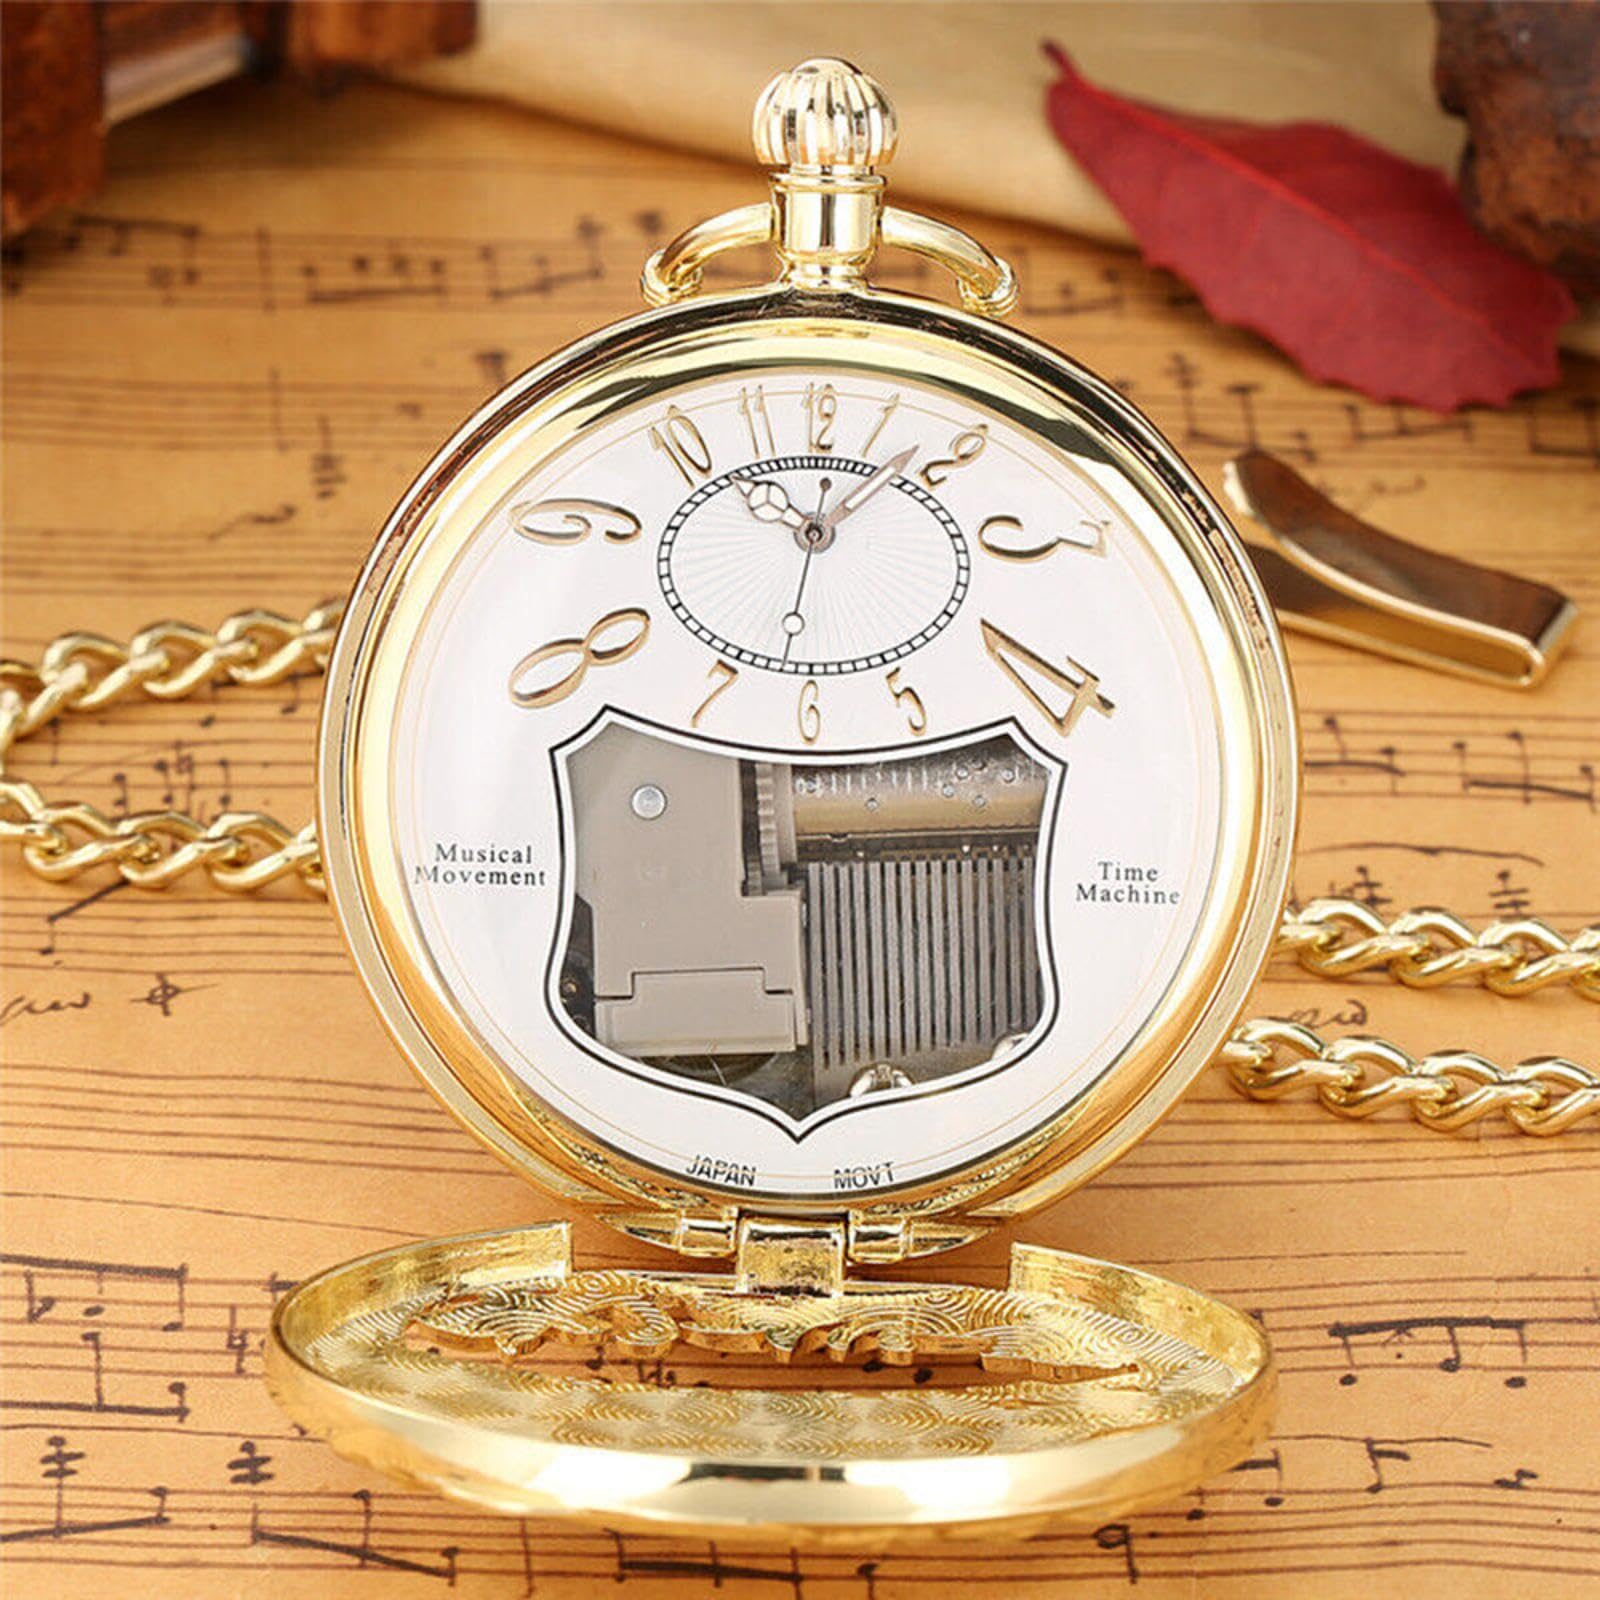 TECKEEN Music Pocket Watch, Can Play The Music, Vintage Time Pocket Watch Movement Running Train On Case